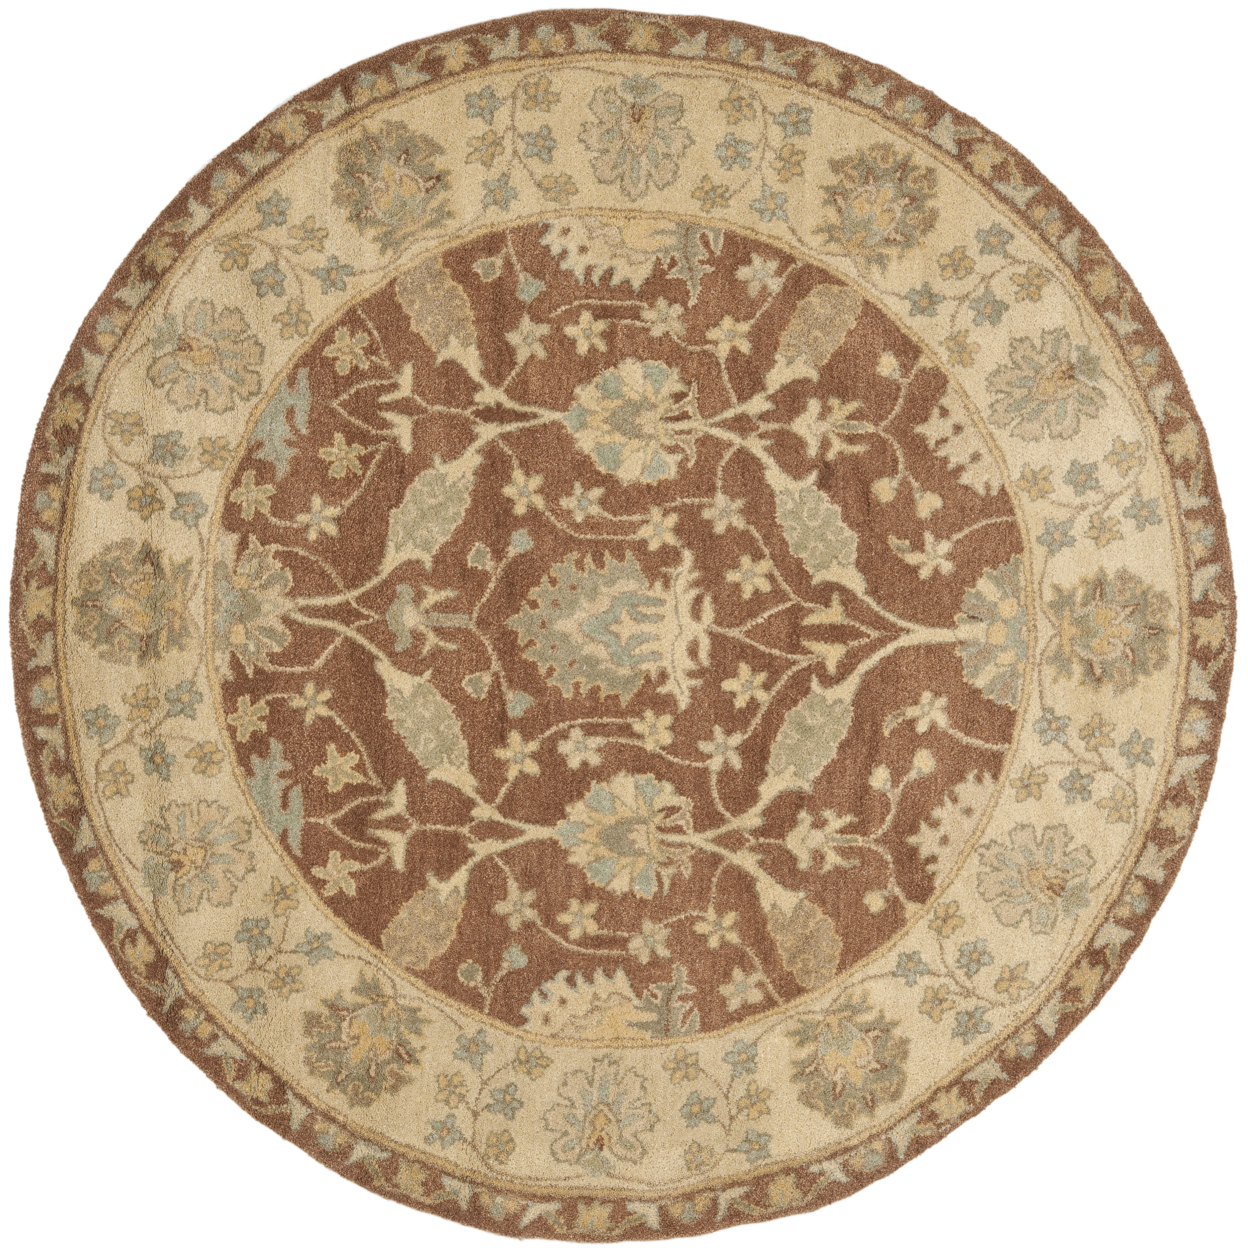 SAFAVIEH Antiquity AT315A Handmade Brown / Taupe Rug - 3' 6 Round